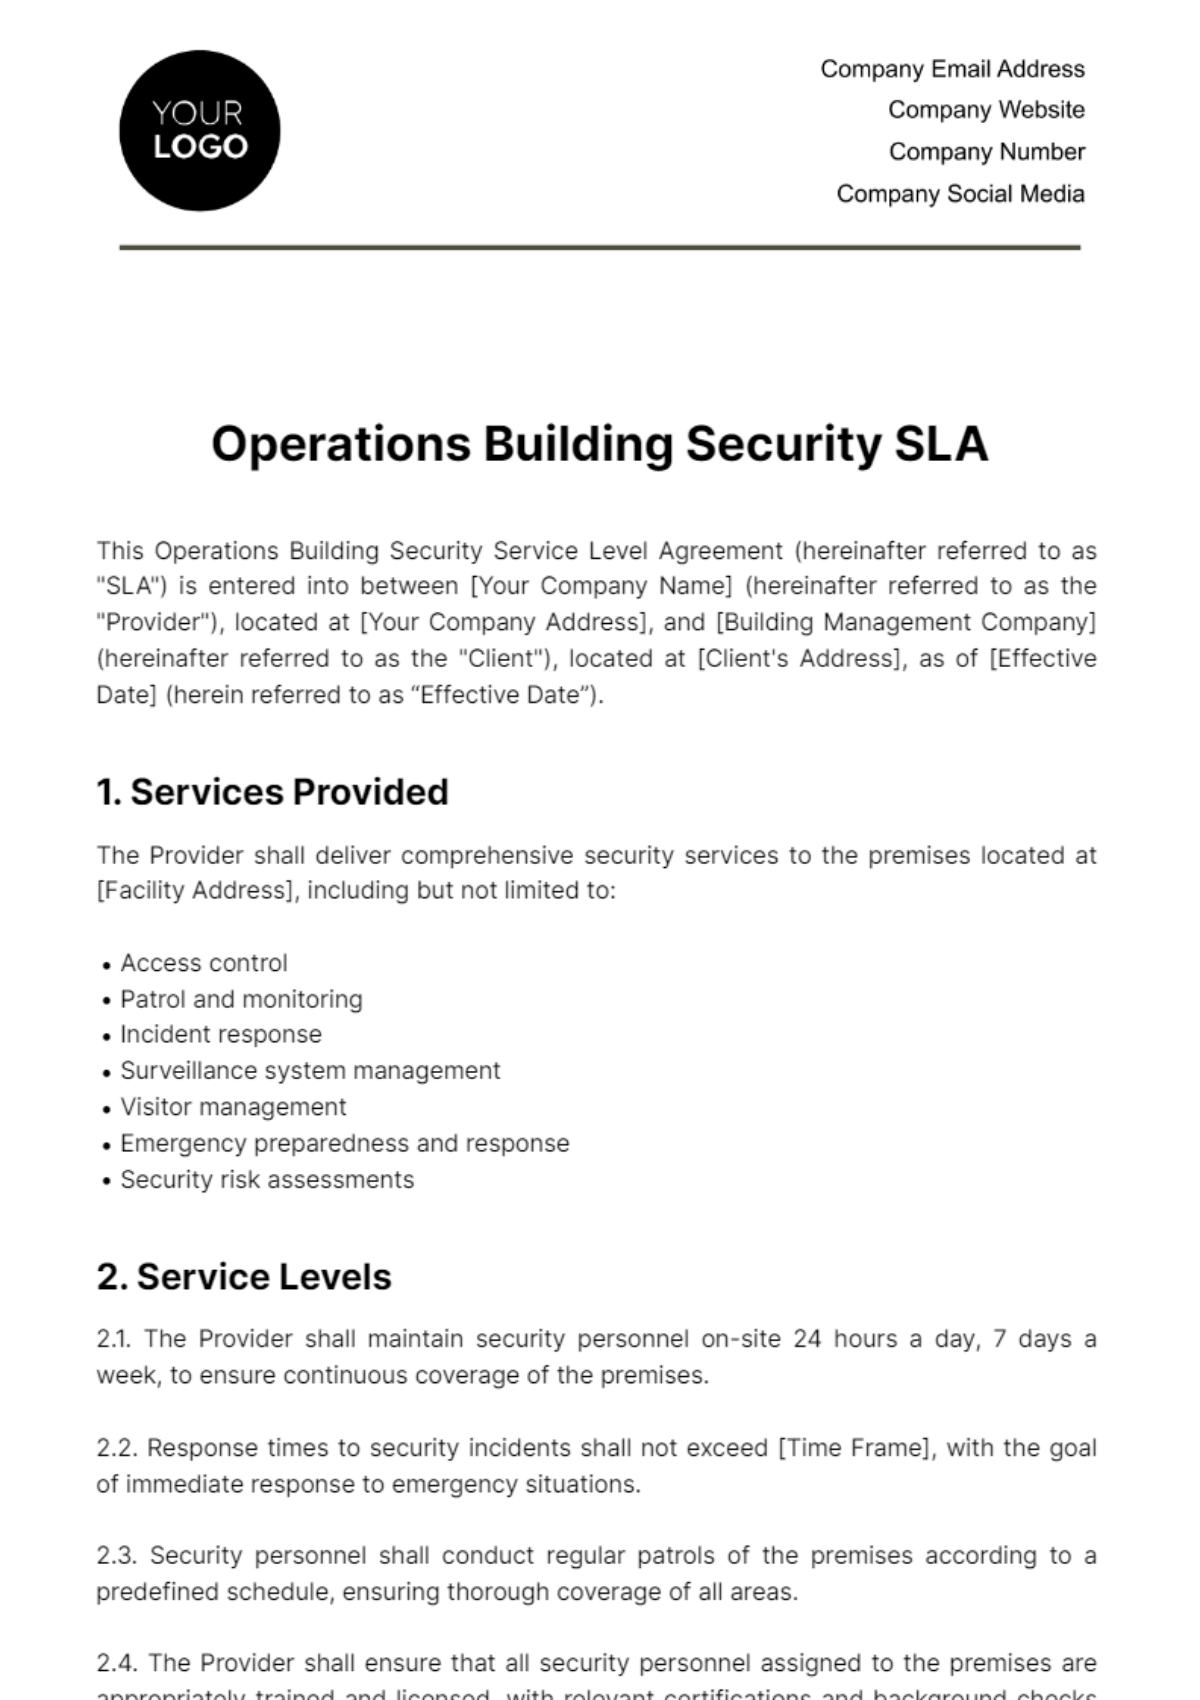 Free Operations Building Security SLA Template